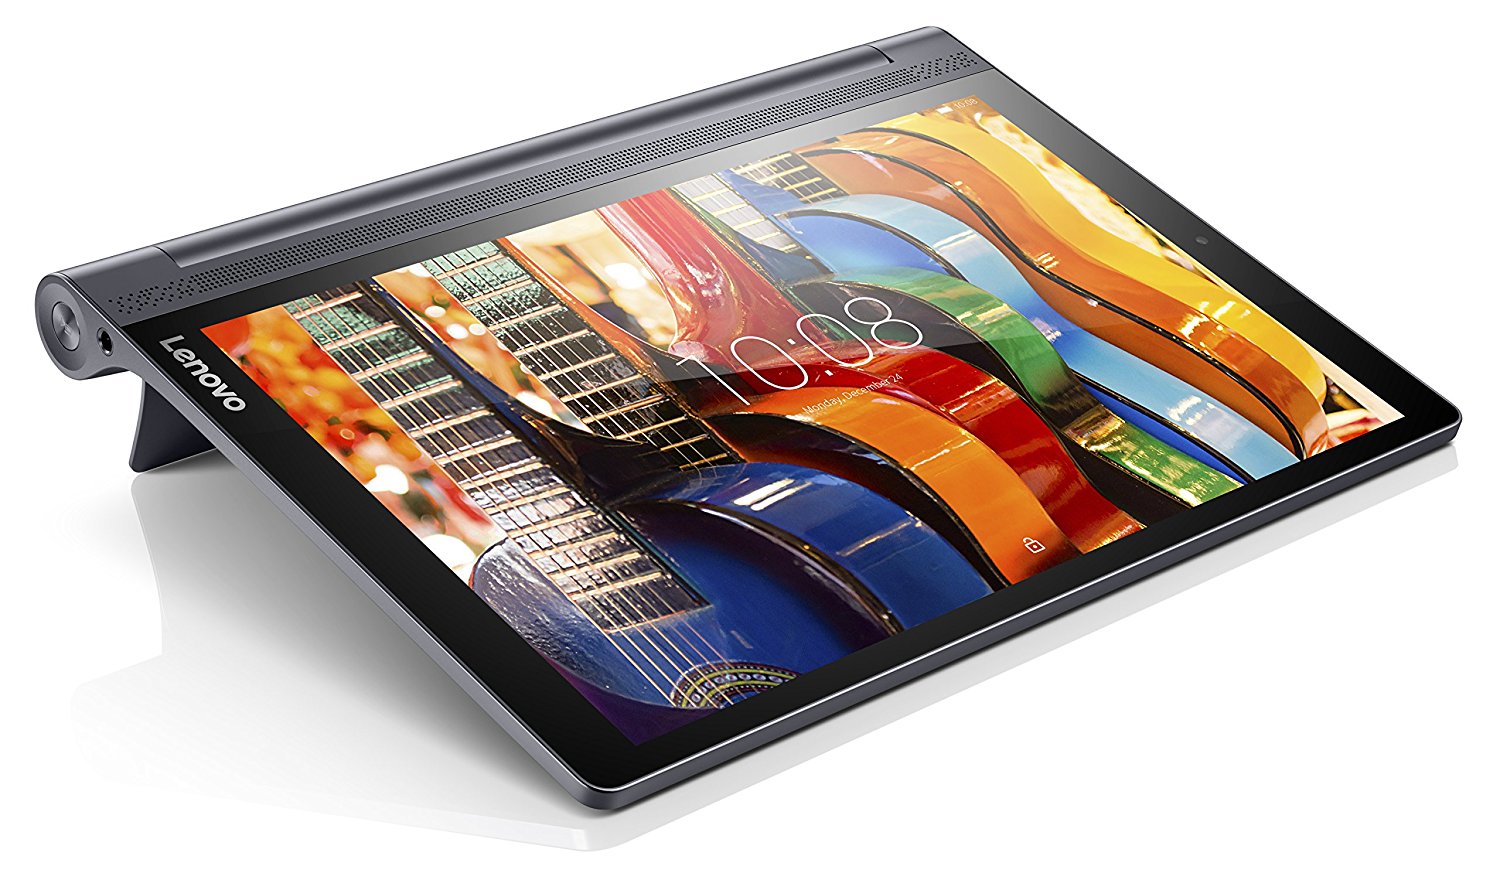 note taking tablet for college lenovo yoga book